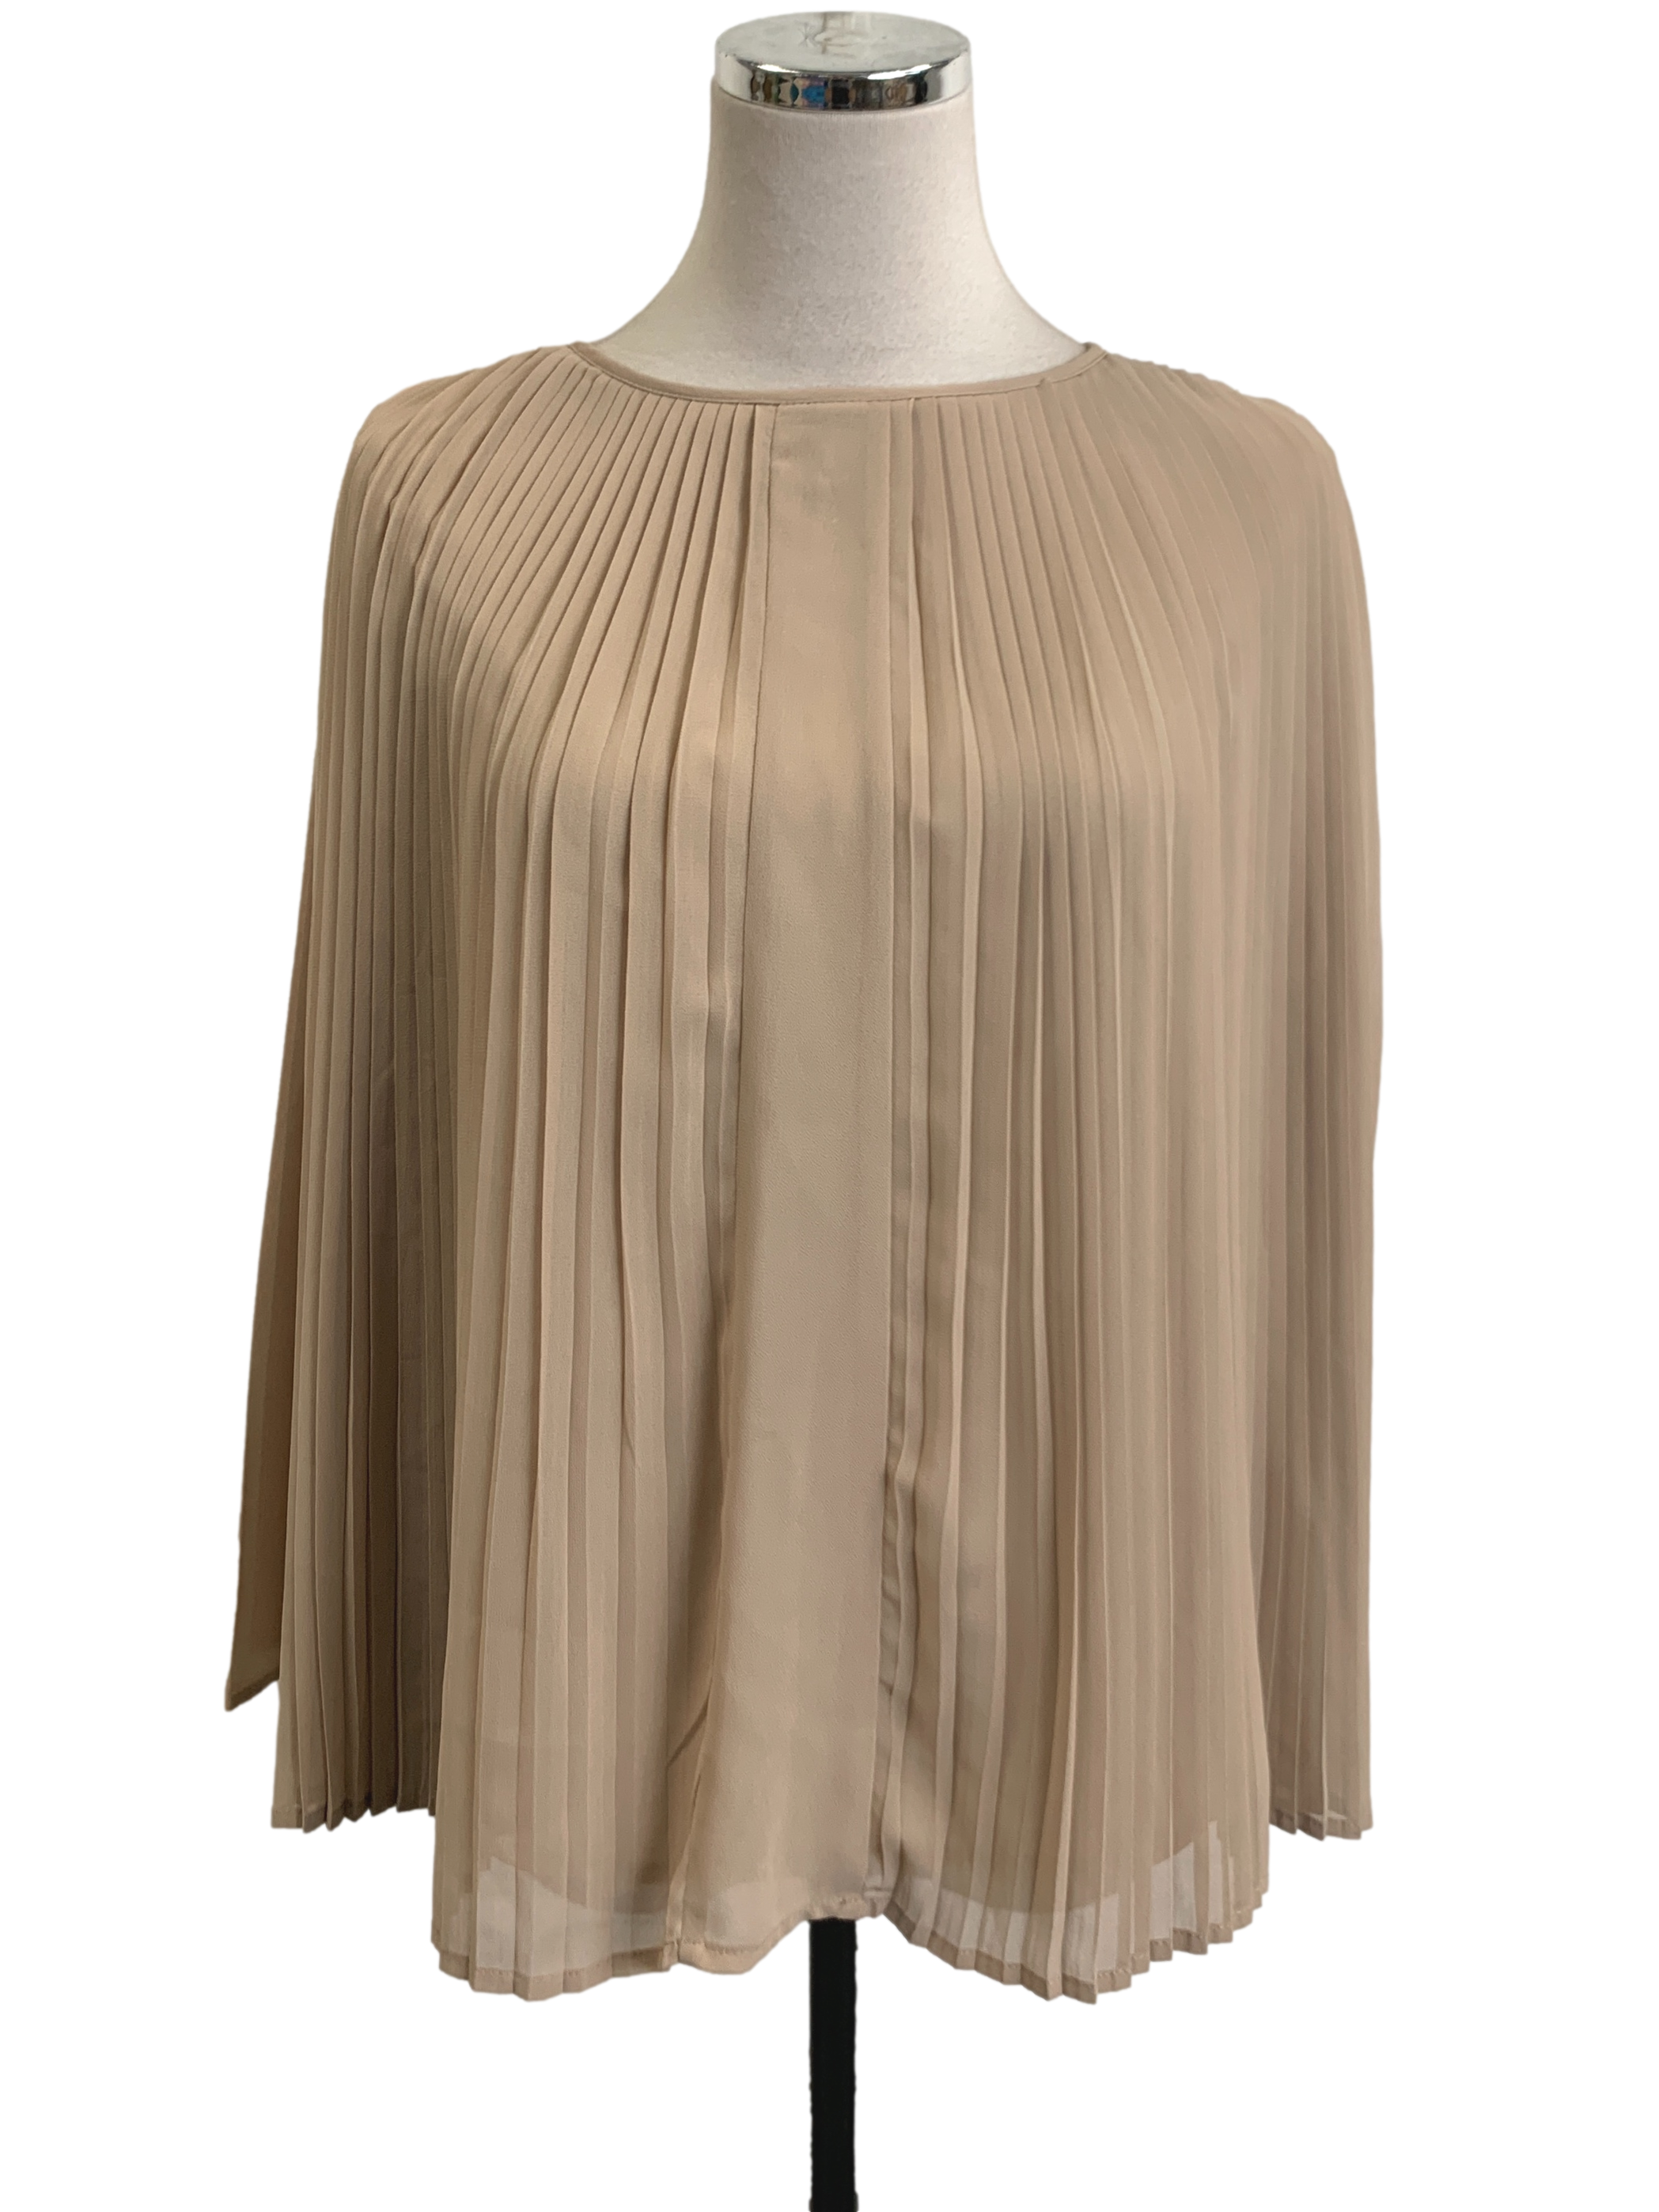 Brown Pleated Top